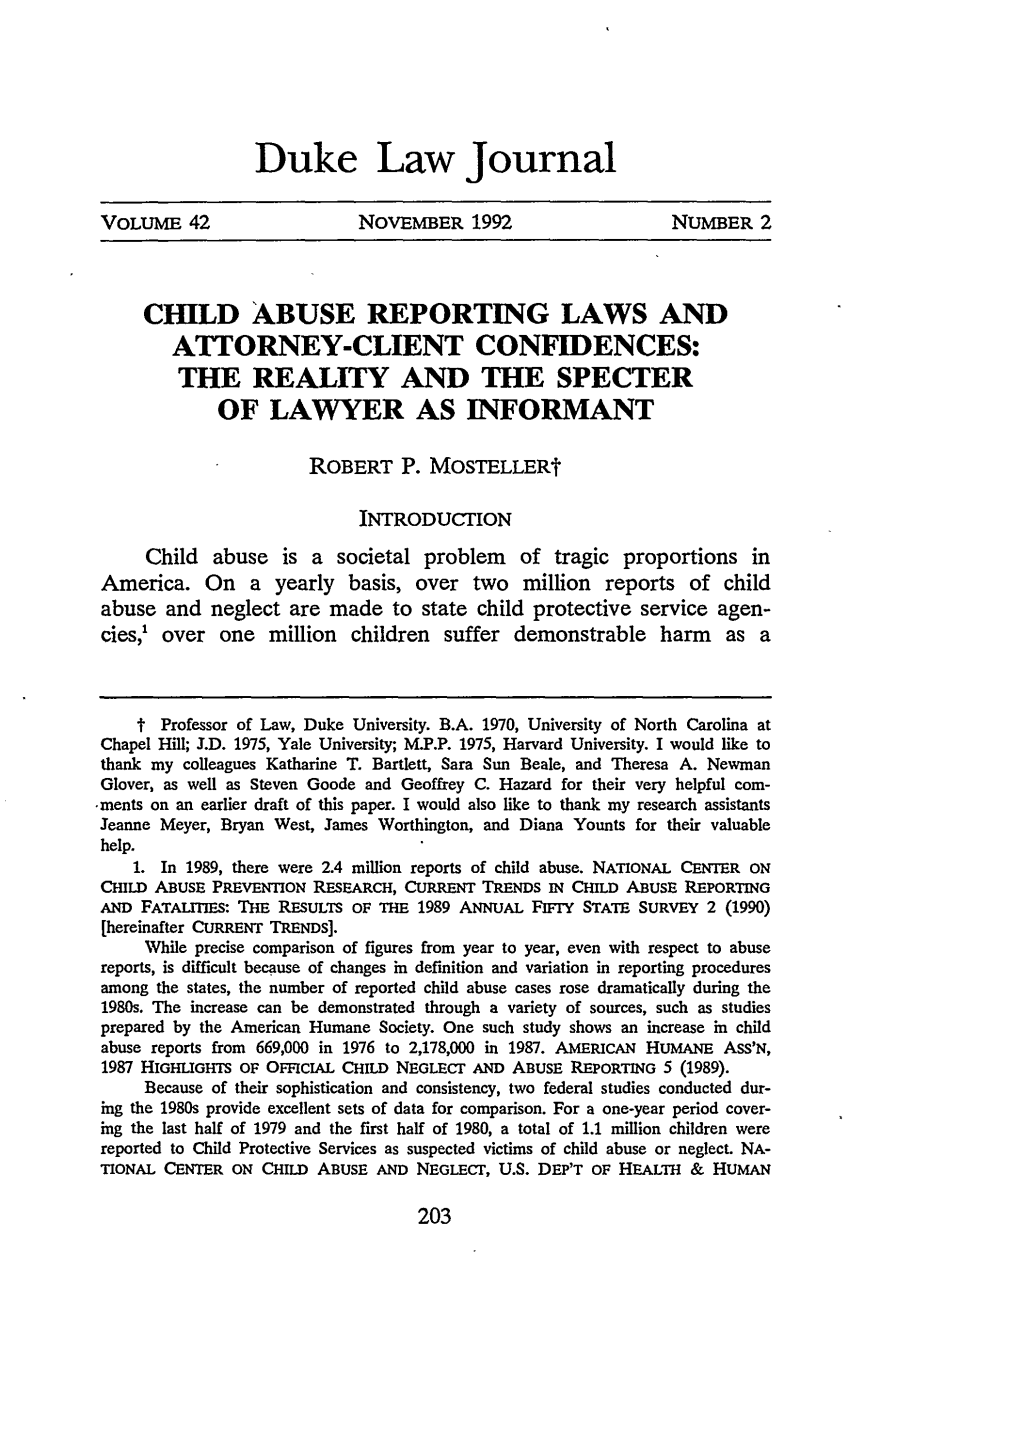 Child Abuse Reporting Laws and Attorney-Client Confidences: the Reality and the Specter of Lawyer As Informant